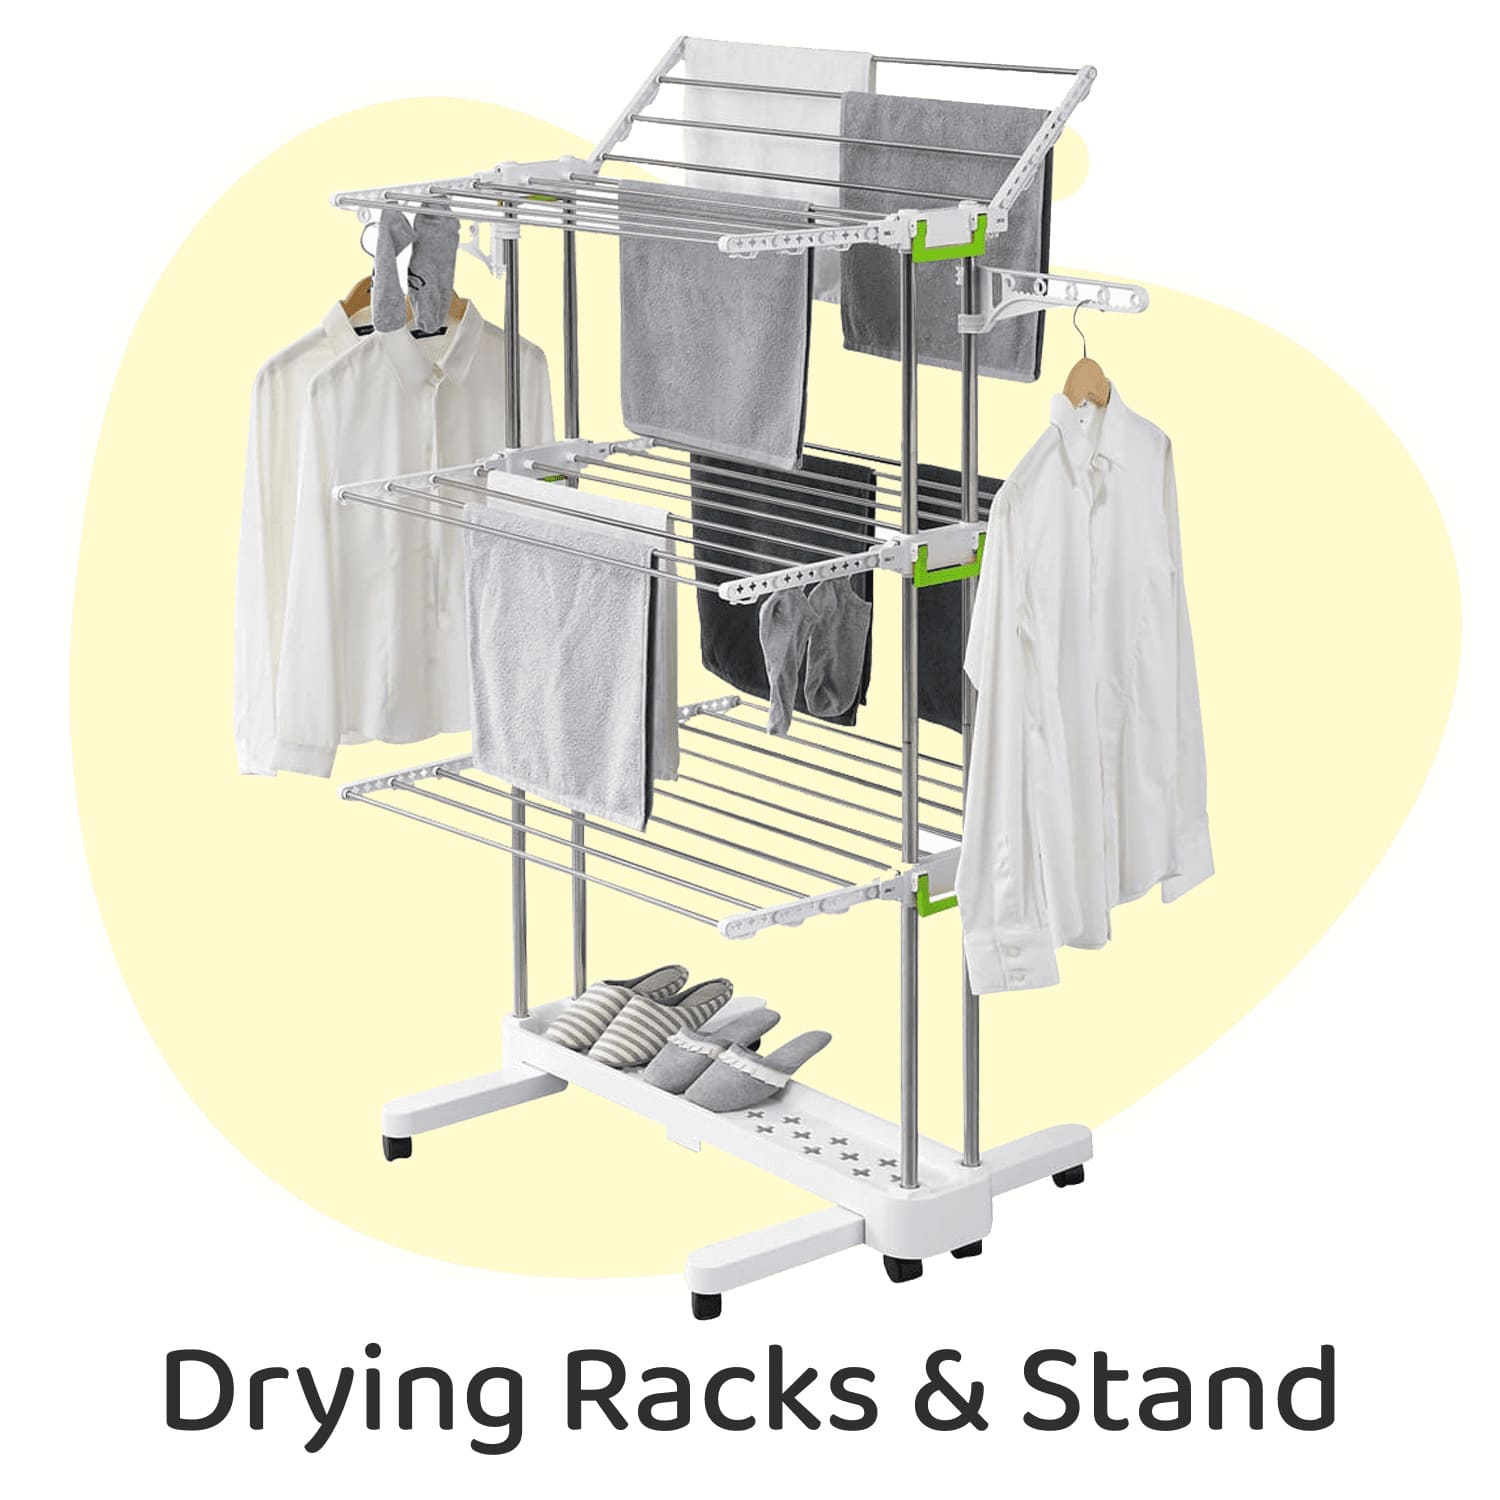 Drying Racks and Stands